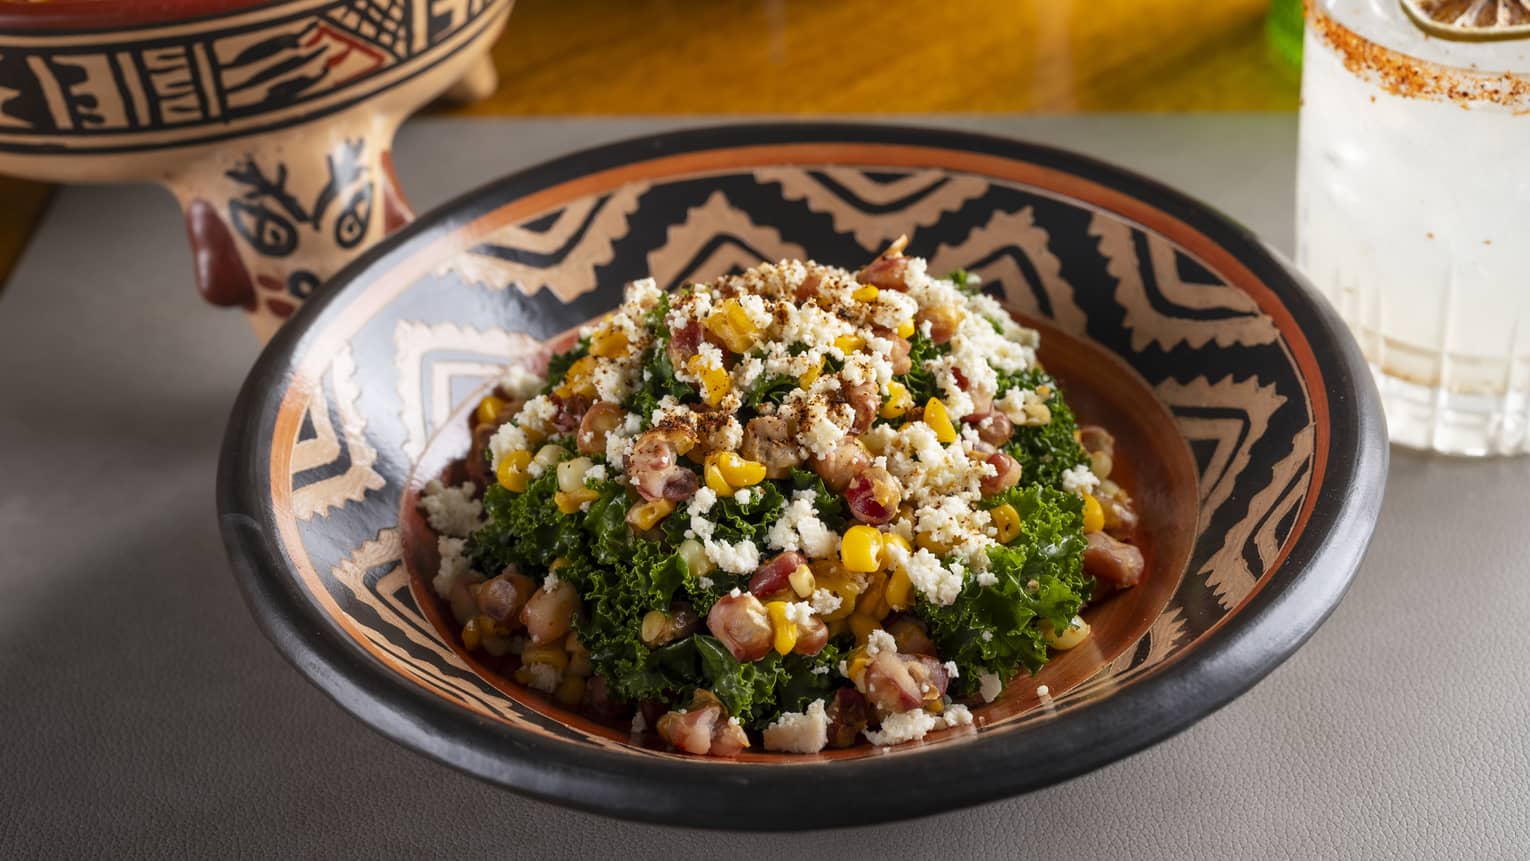 Assorted corn, kale, cuajada cheese and chipotle aioli served in a black-and-white patterned clay bowl